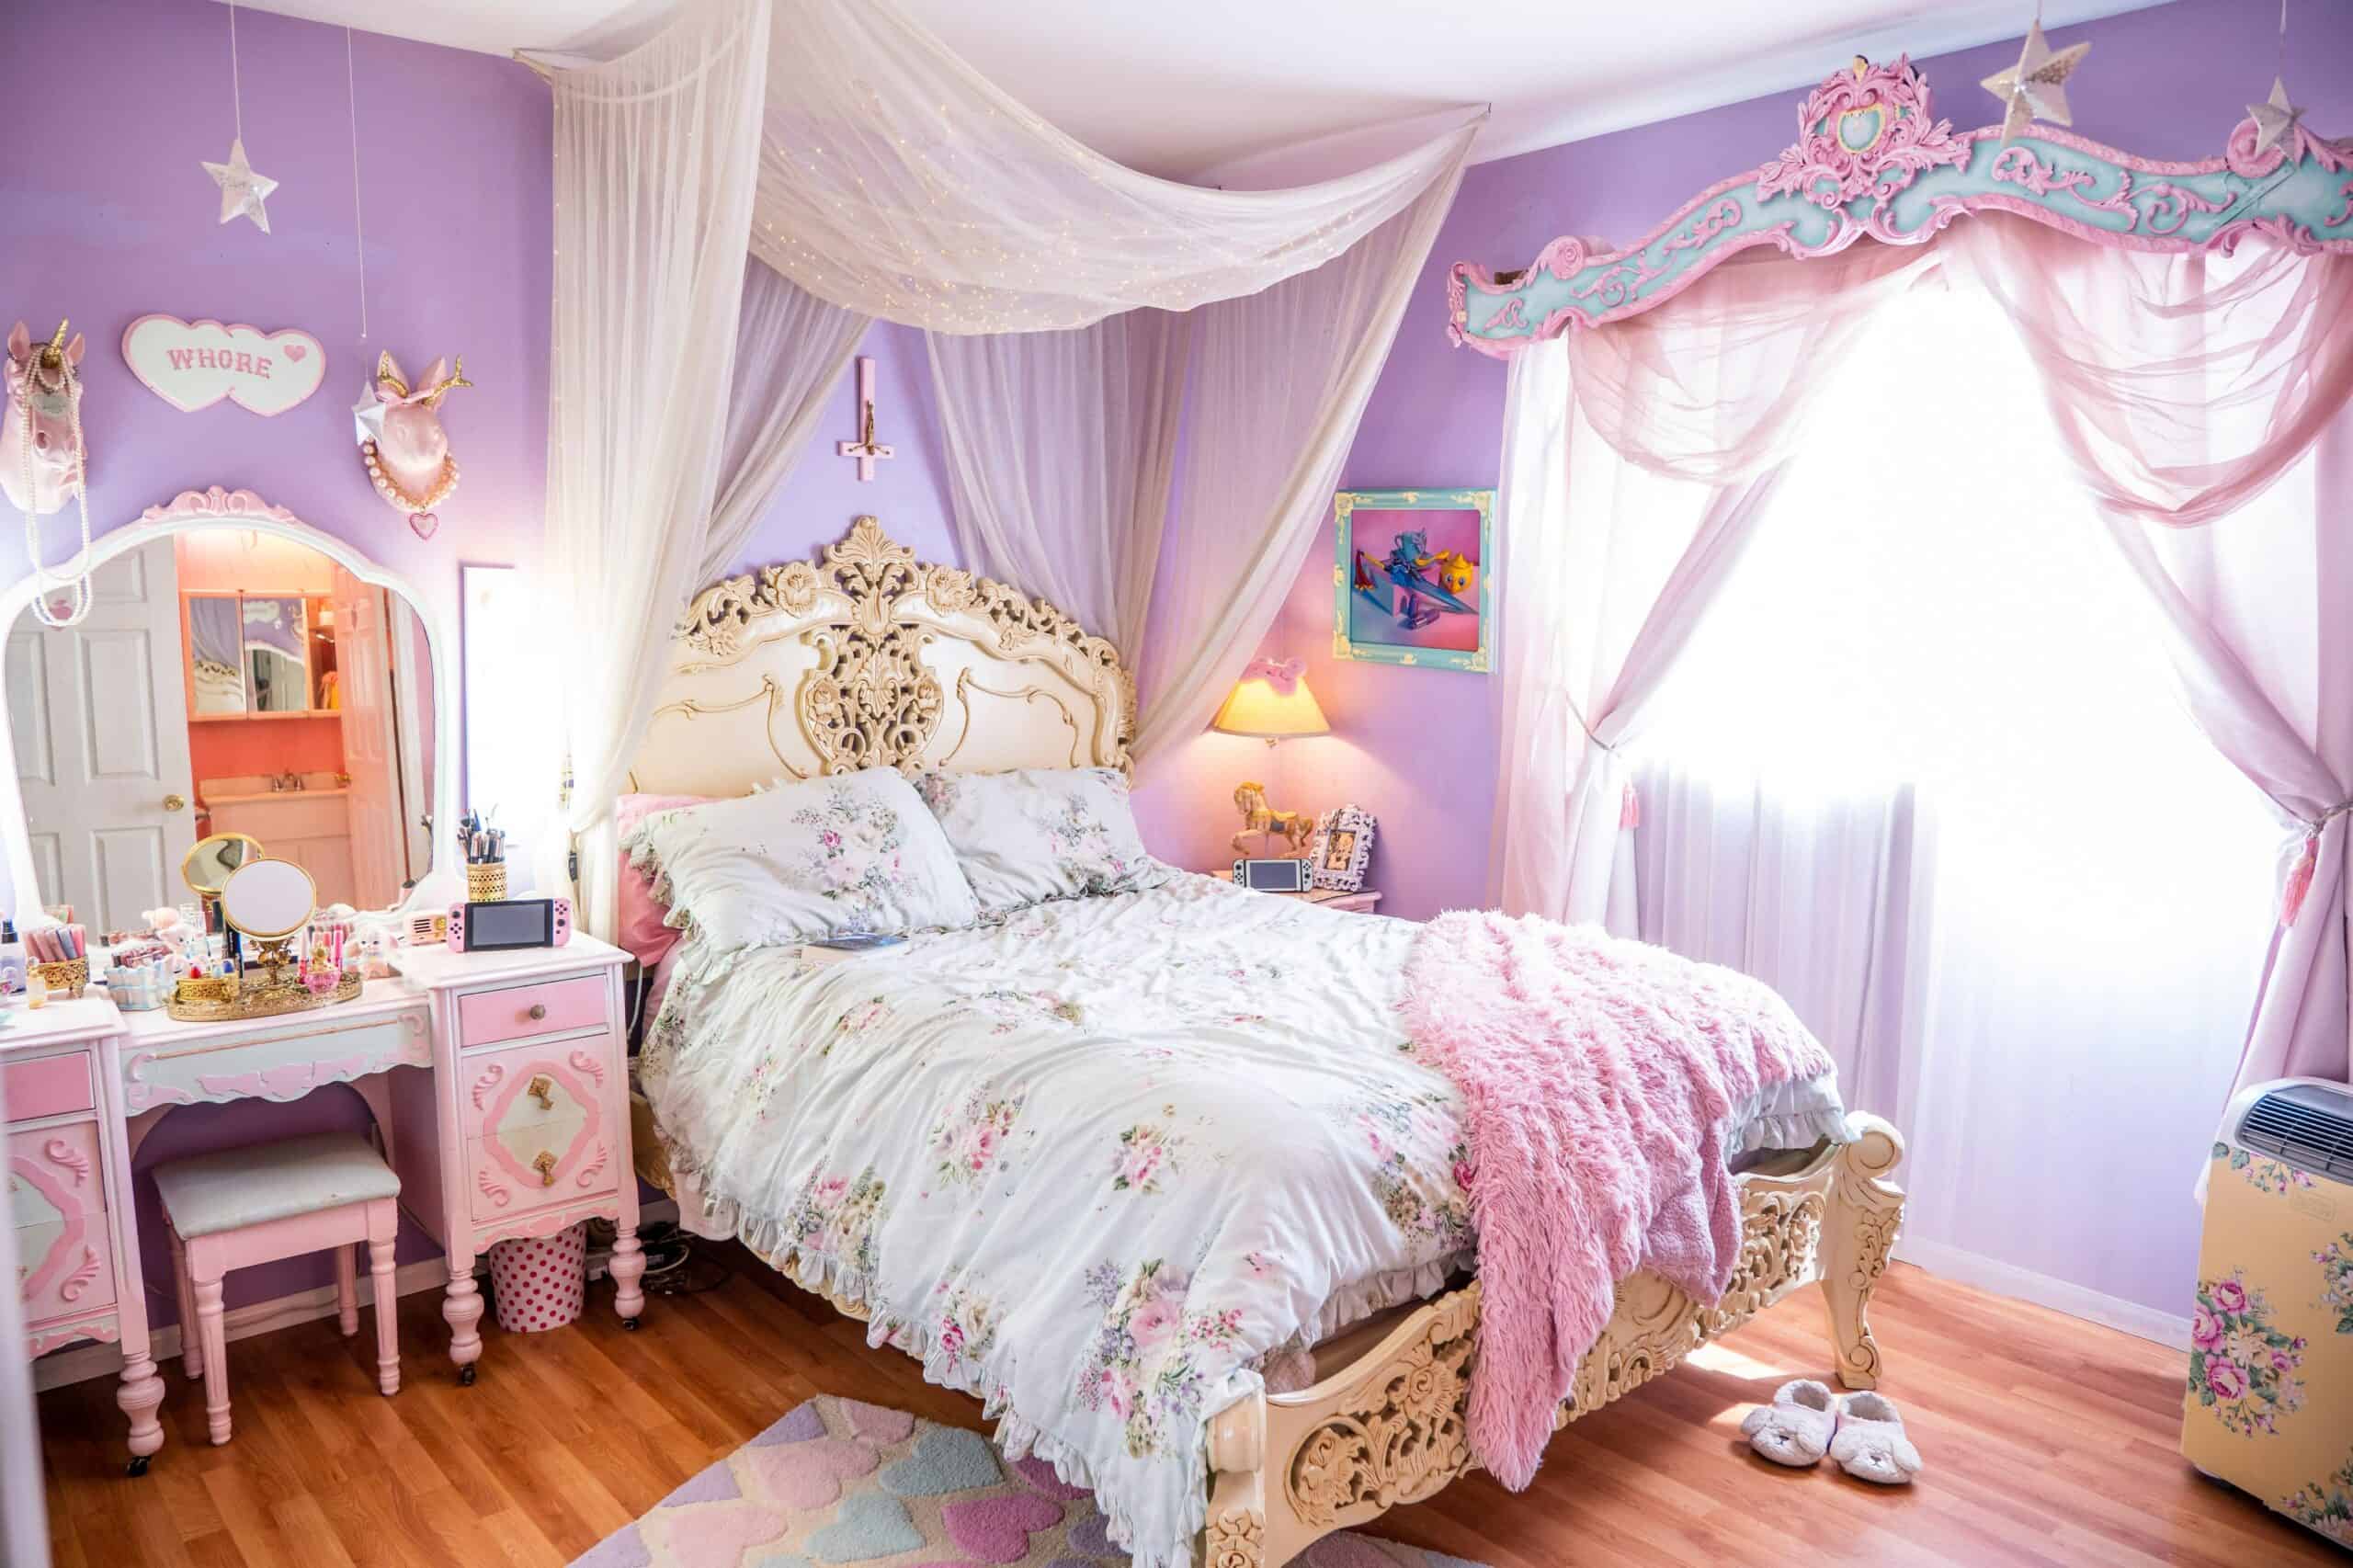 https://www.peerspace.com/resources/wp-content/uploads/Magical-doll-house-los-angeles-rental-scaled.jpg